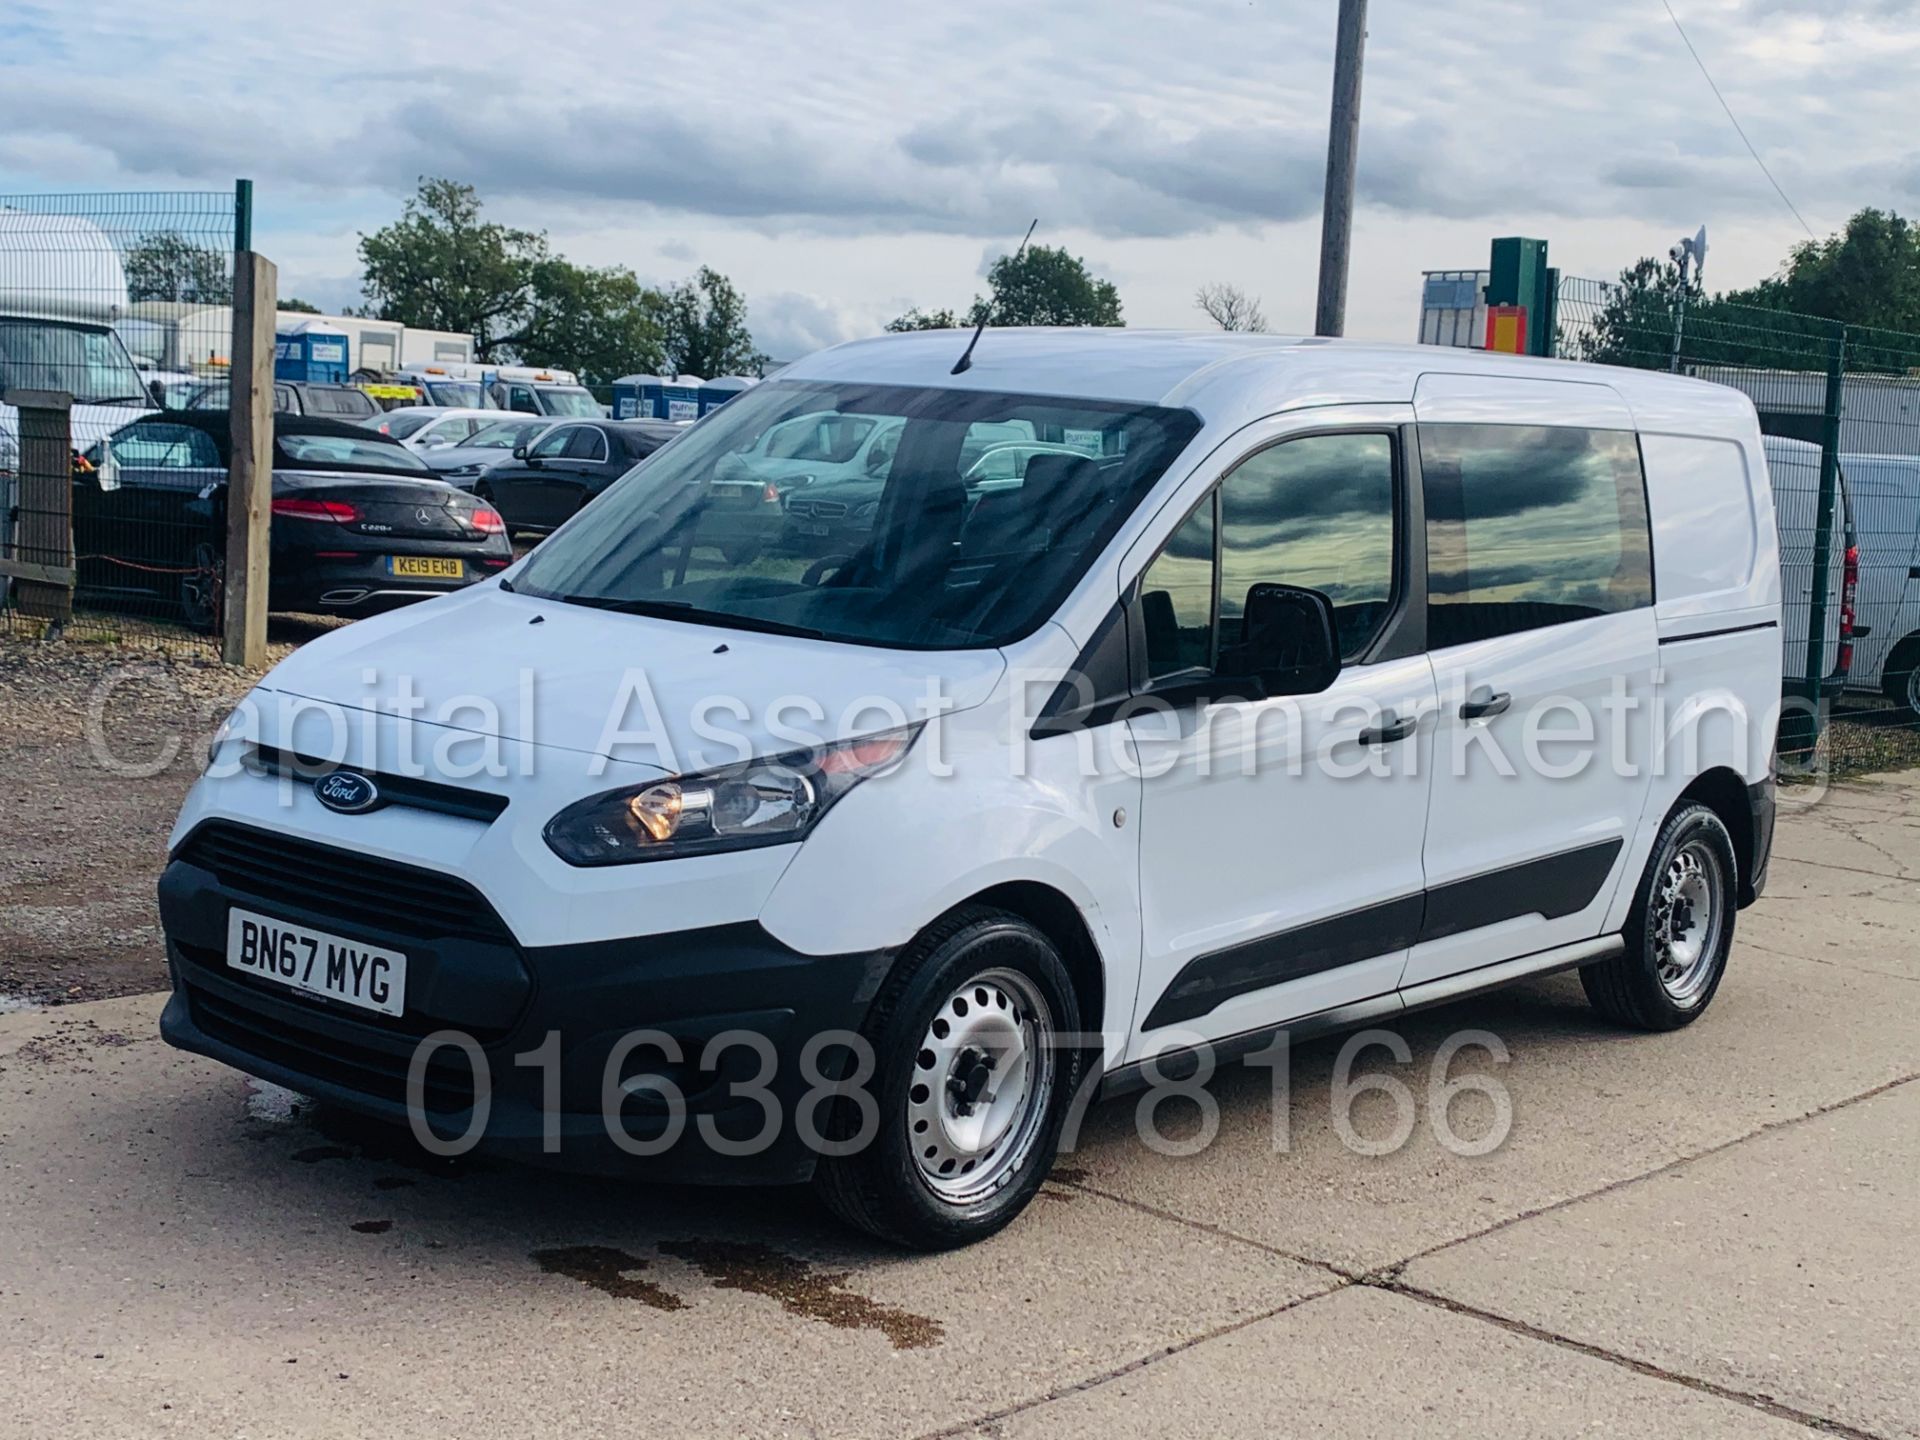 (ON SALE) FORD TRANSIT CONNECT *LWB - 5 SEATER CREW VAN* (2018 - EURO 6) 1.5 TDCI *A/C* (1 OWNER) - Image 3 of 40